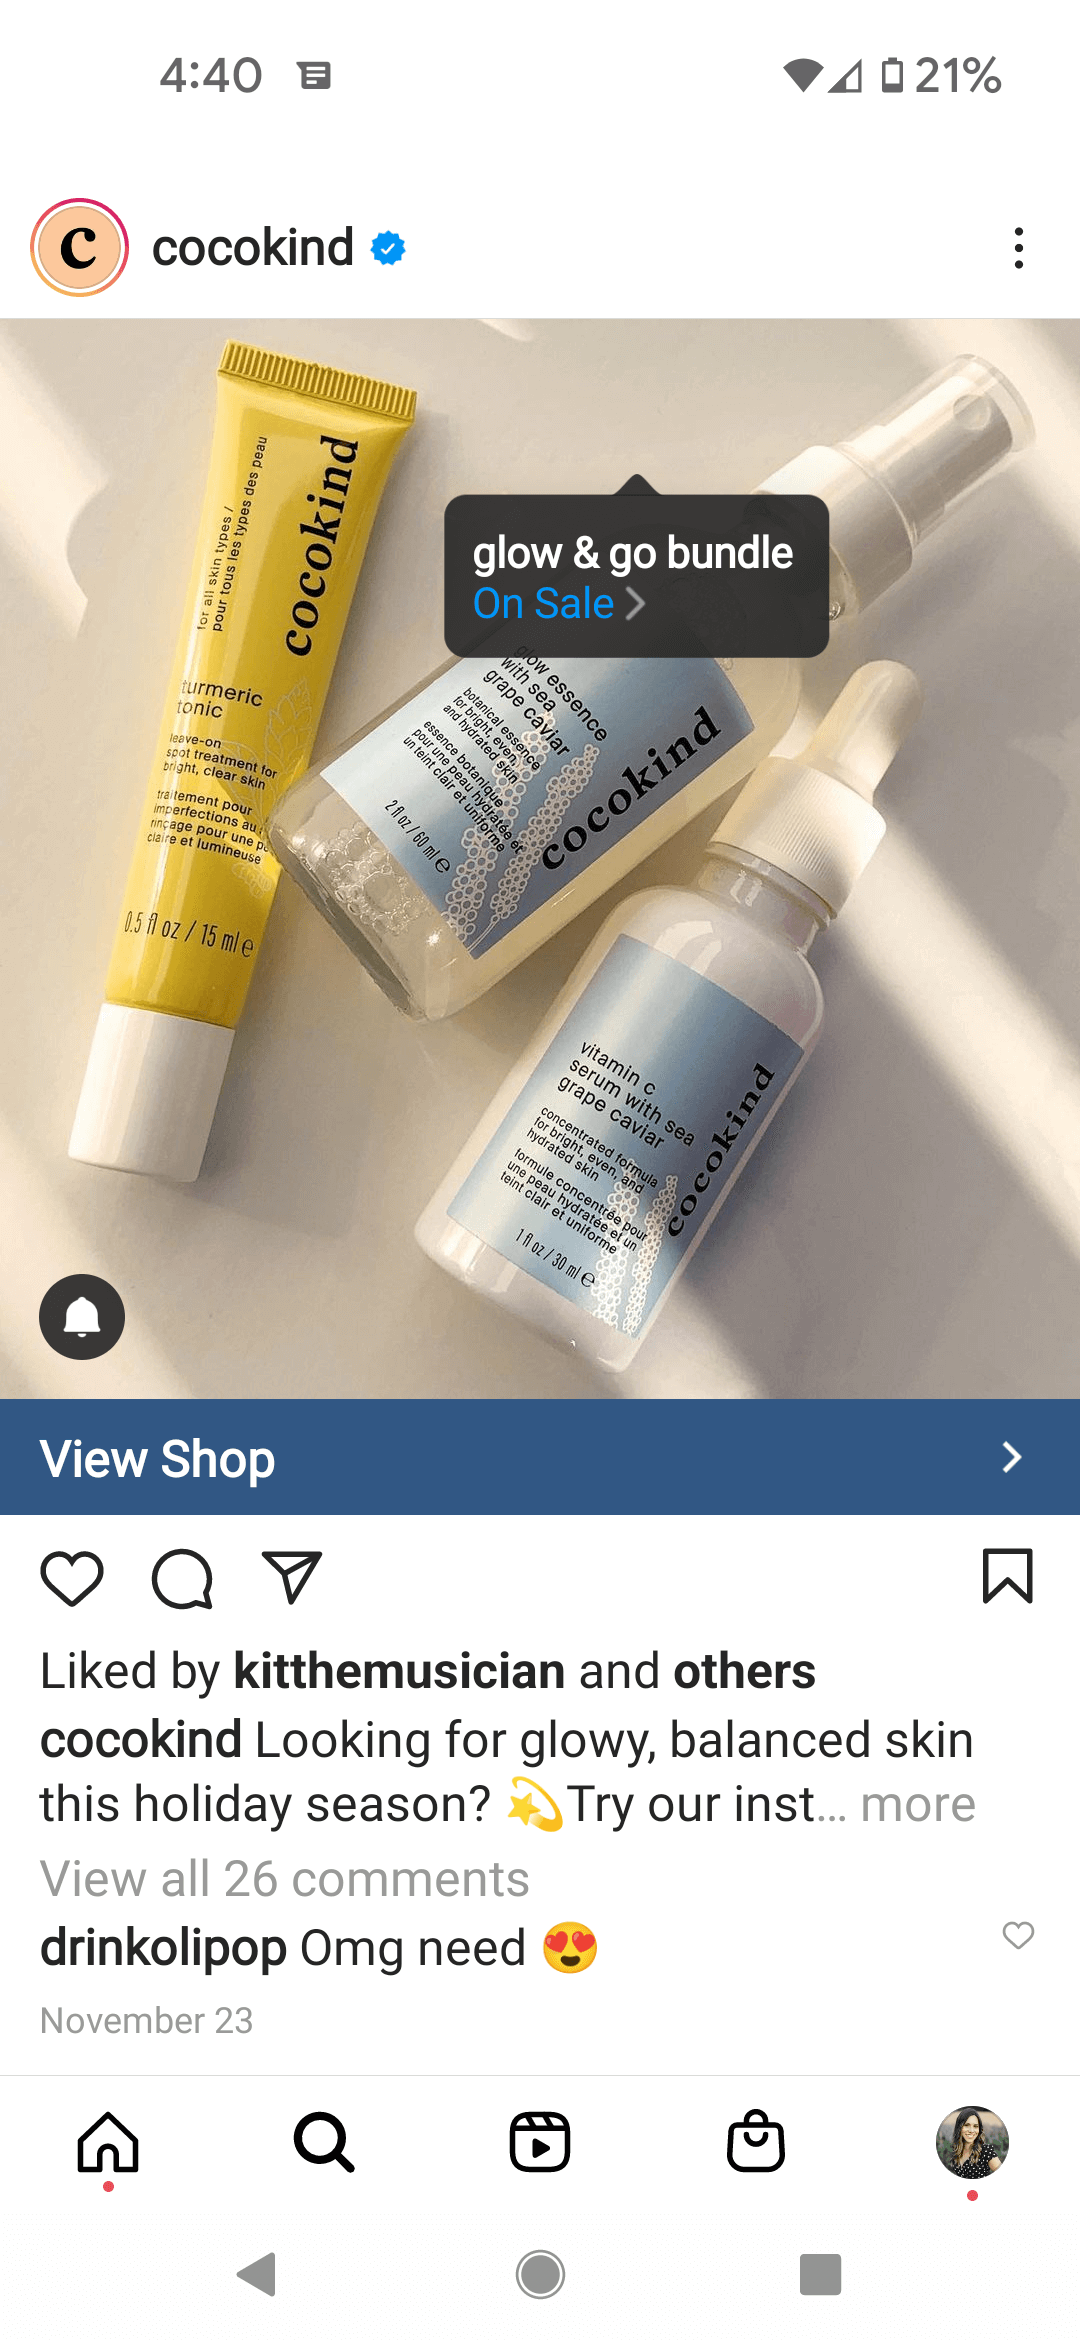 Screenshot of Cocokind's Instagram post where you can click to purchase the item